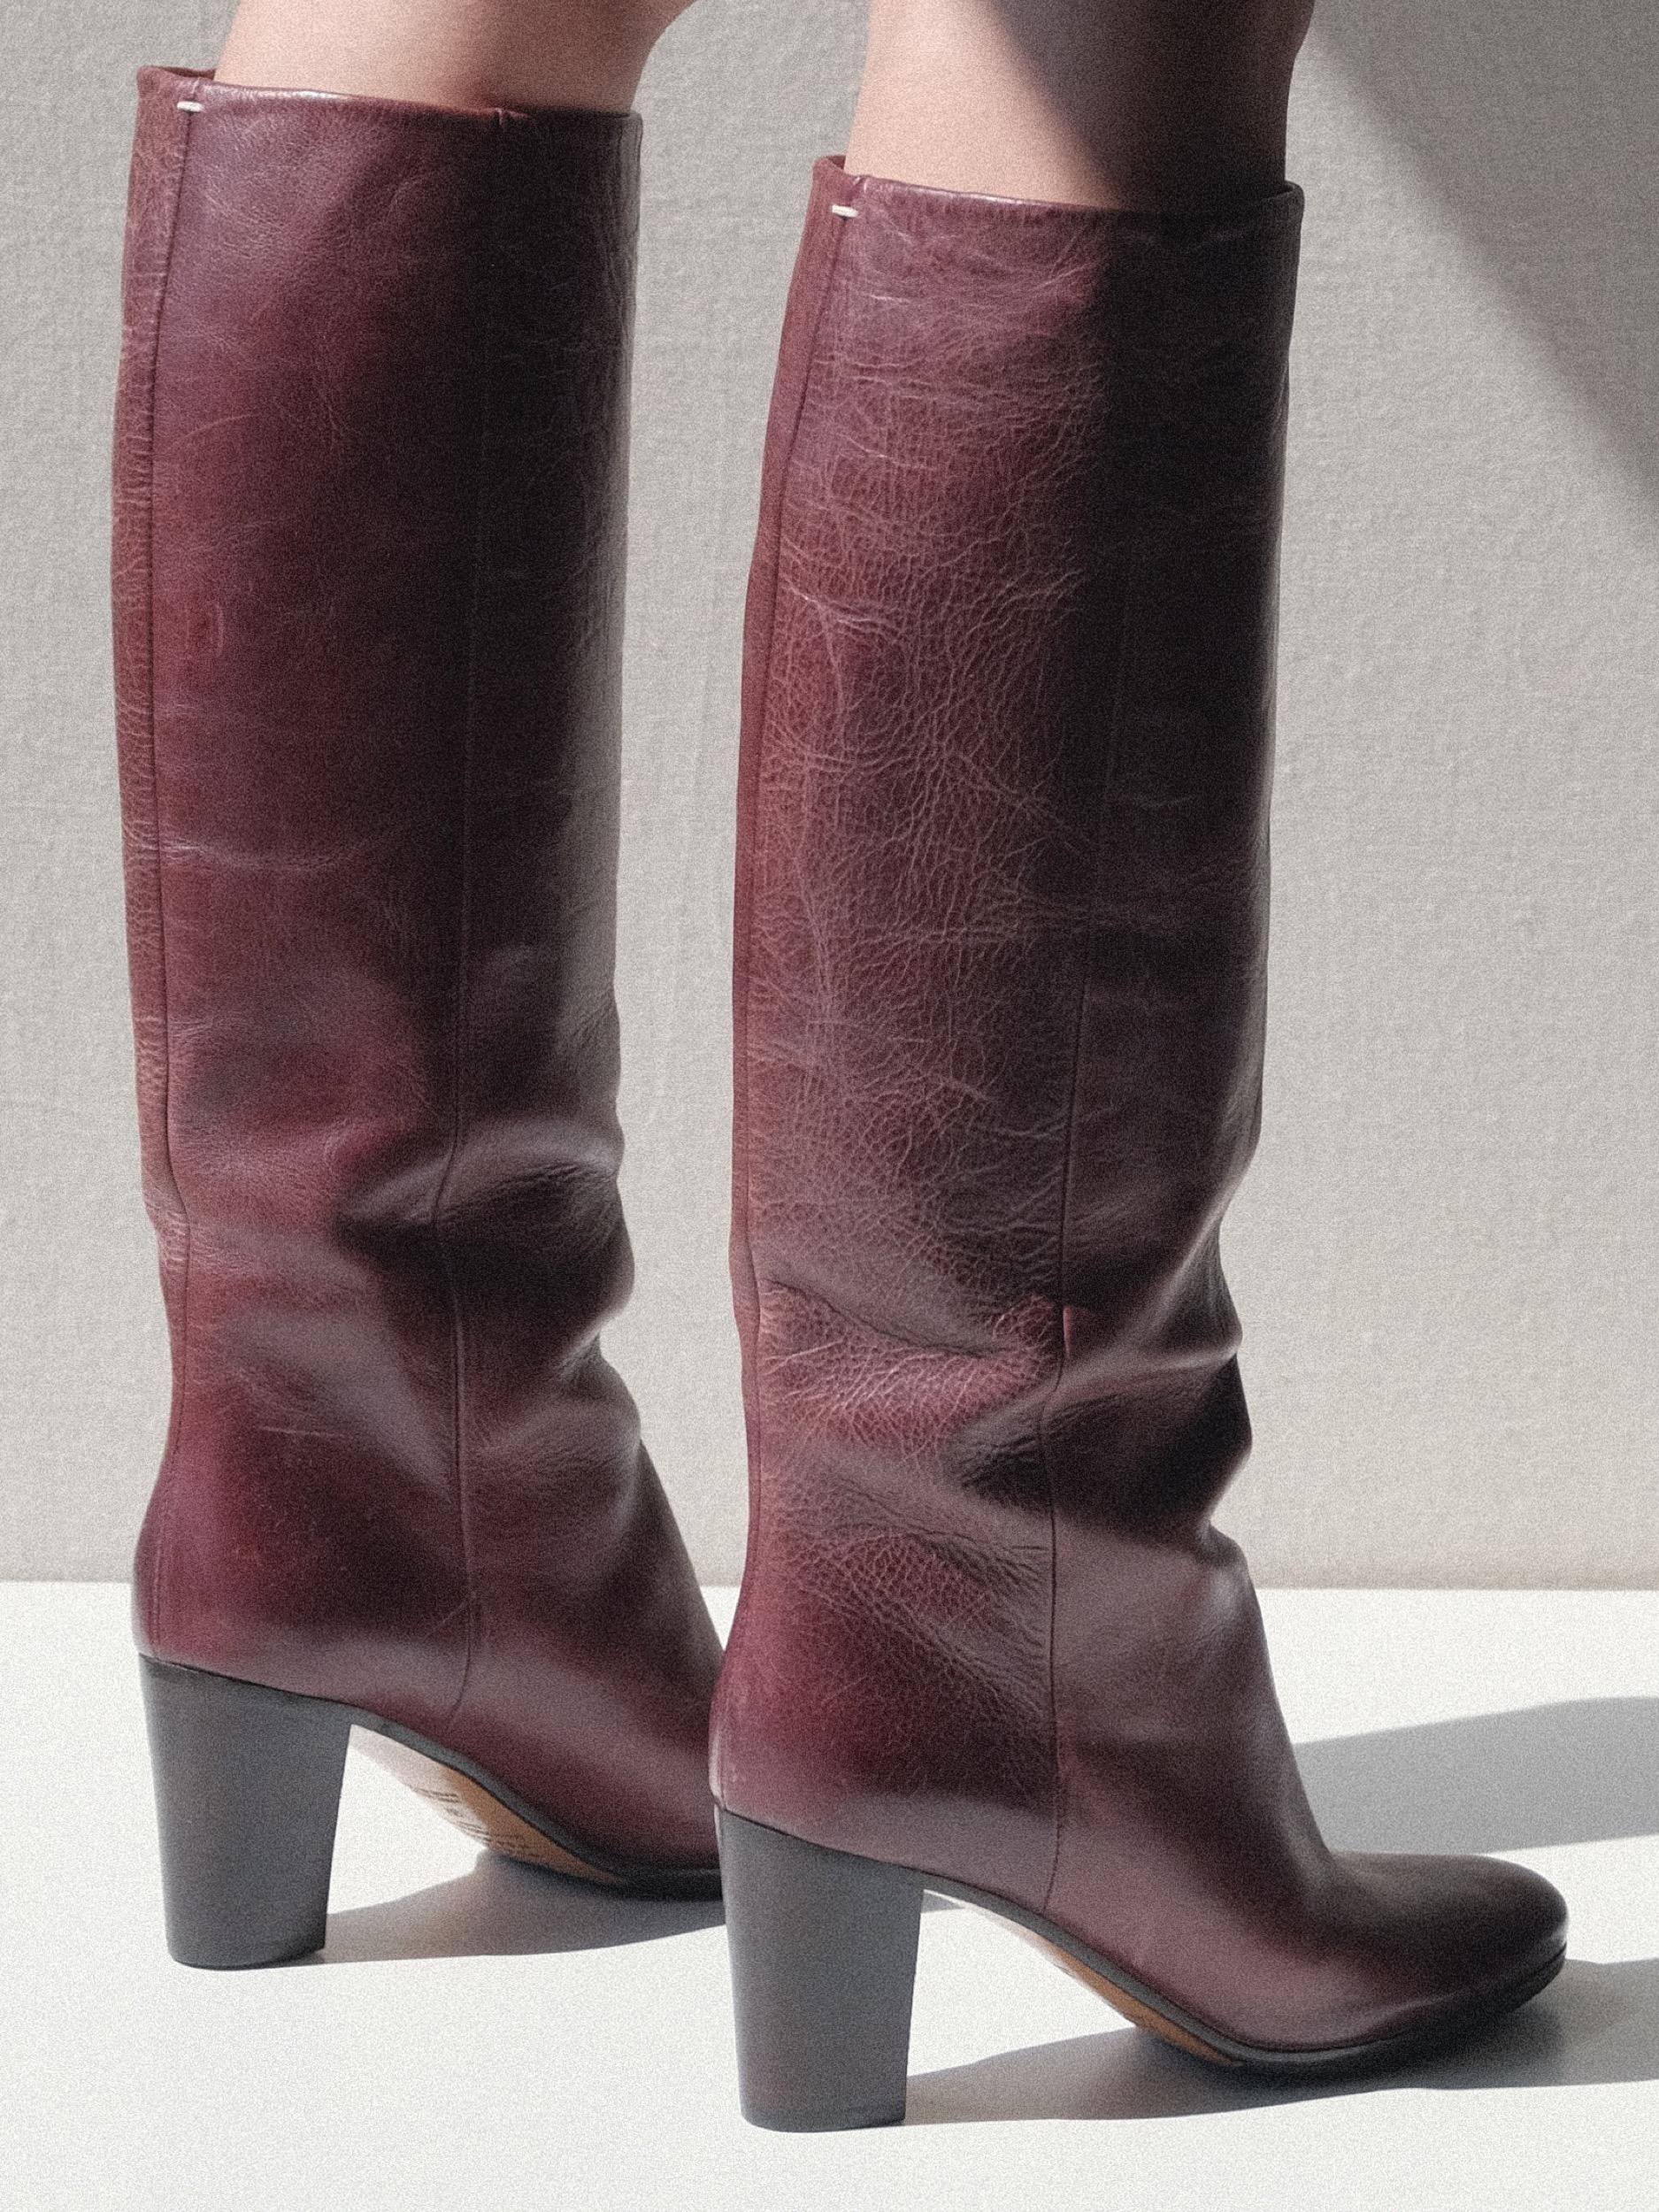 Martin Margiela Riding Boots Deep Red Size 37 Replica Line 22 For Sale 9